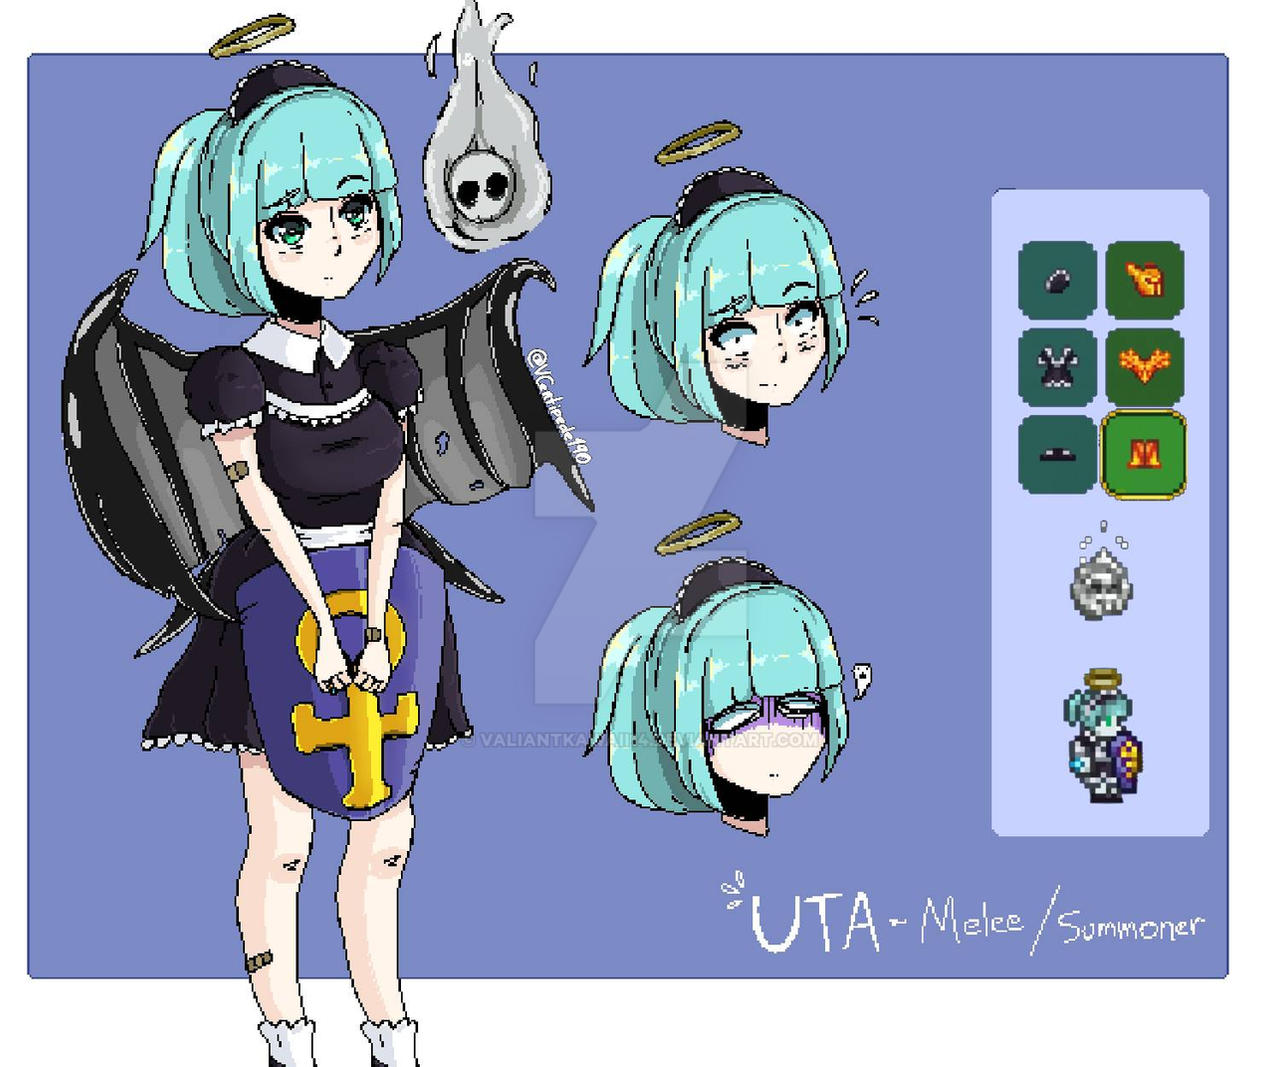 My terraria Character by acejt on DeviantArt